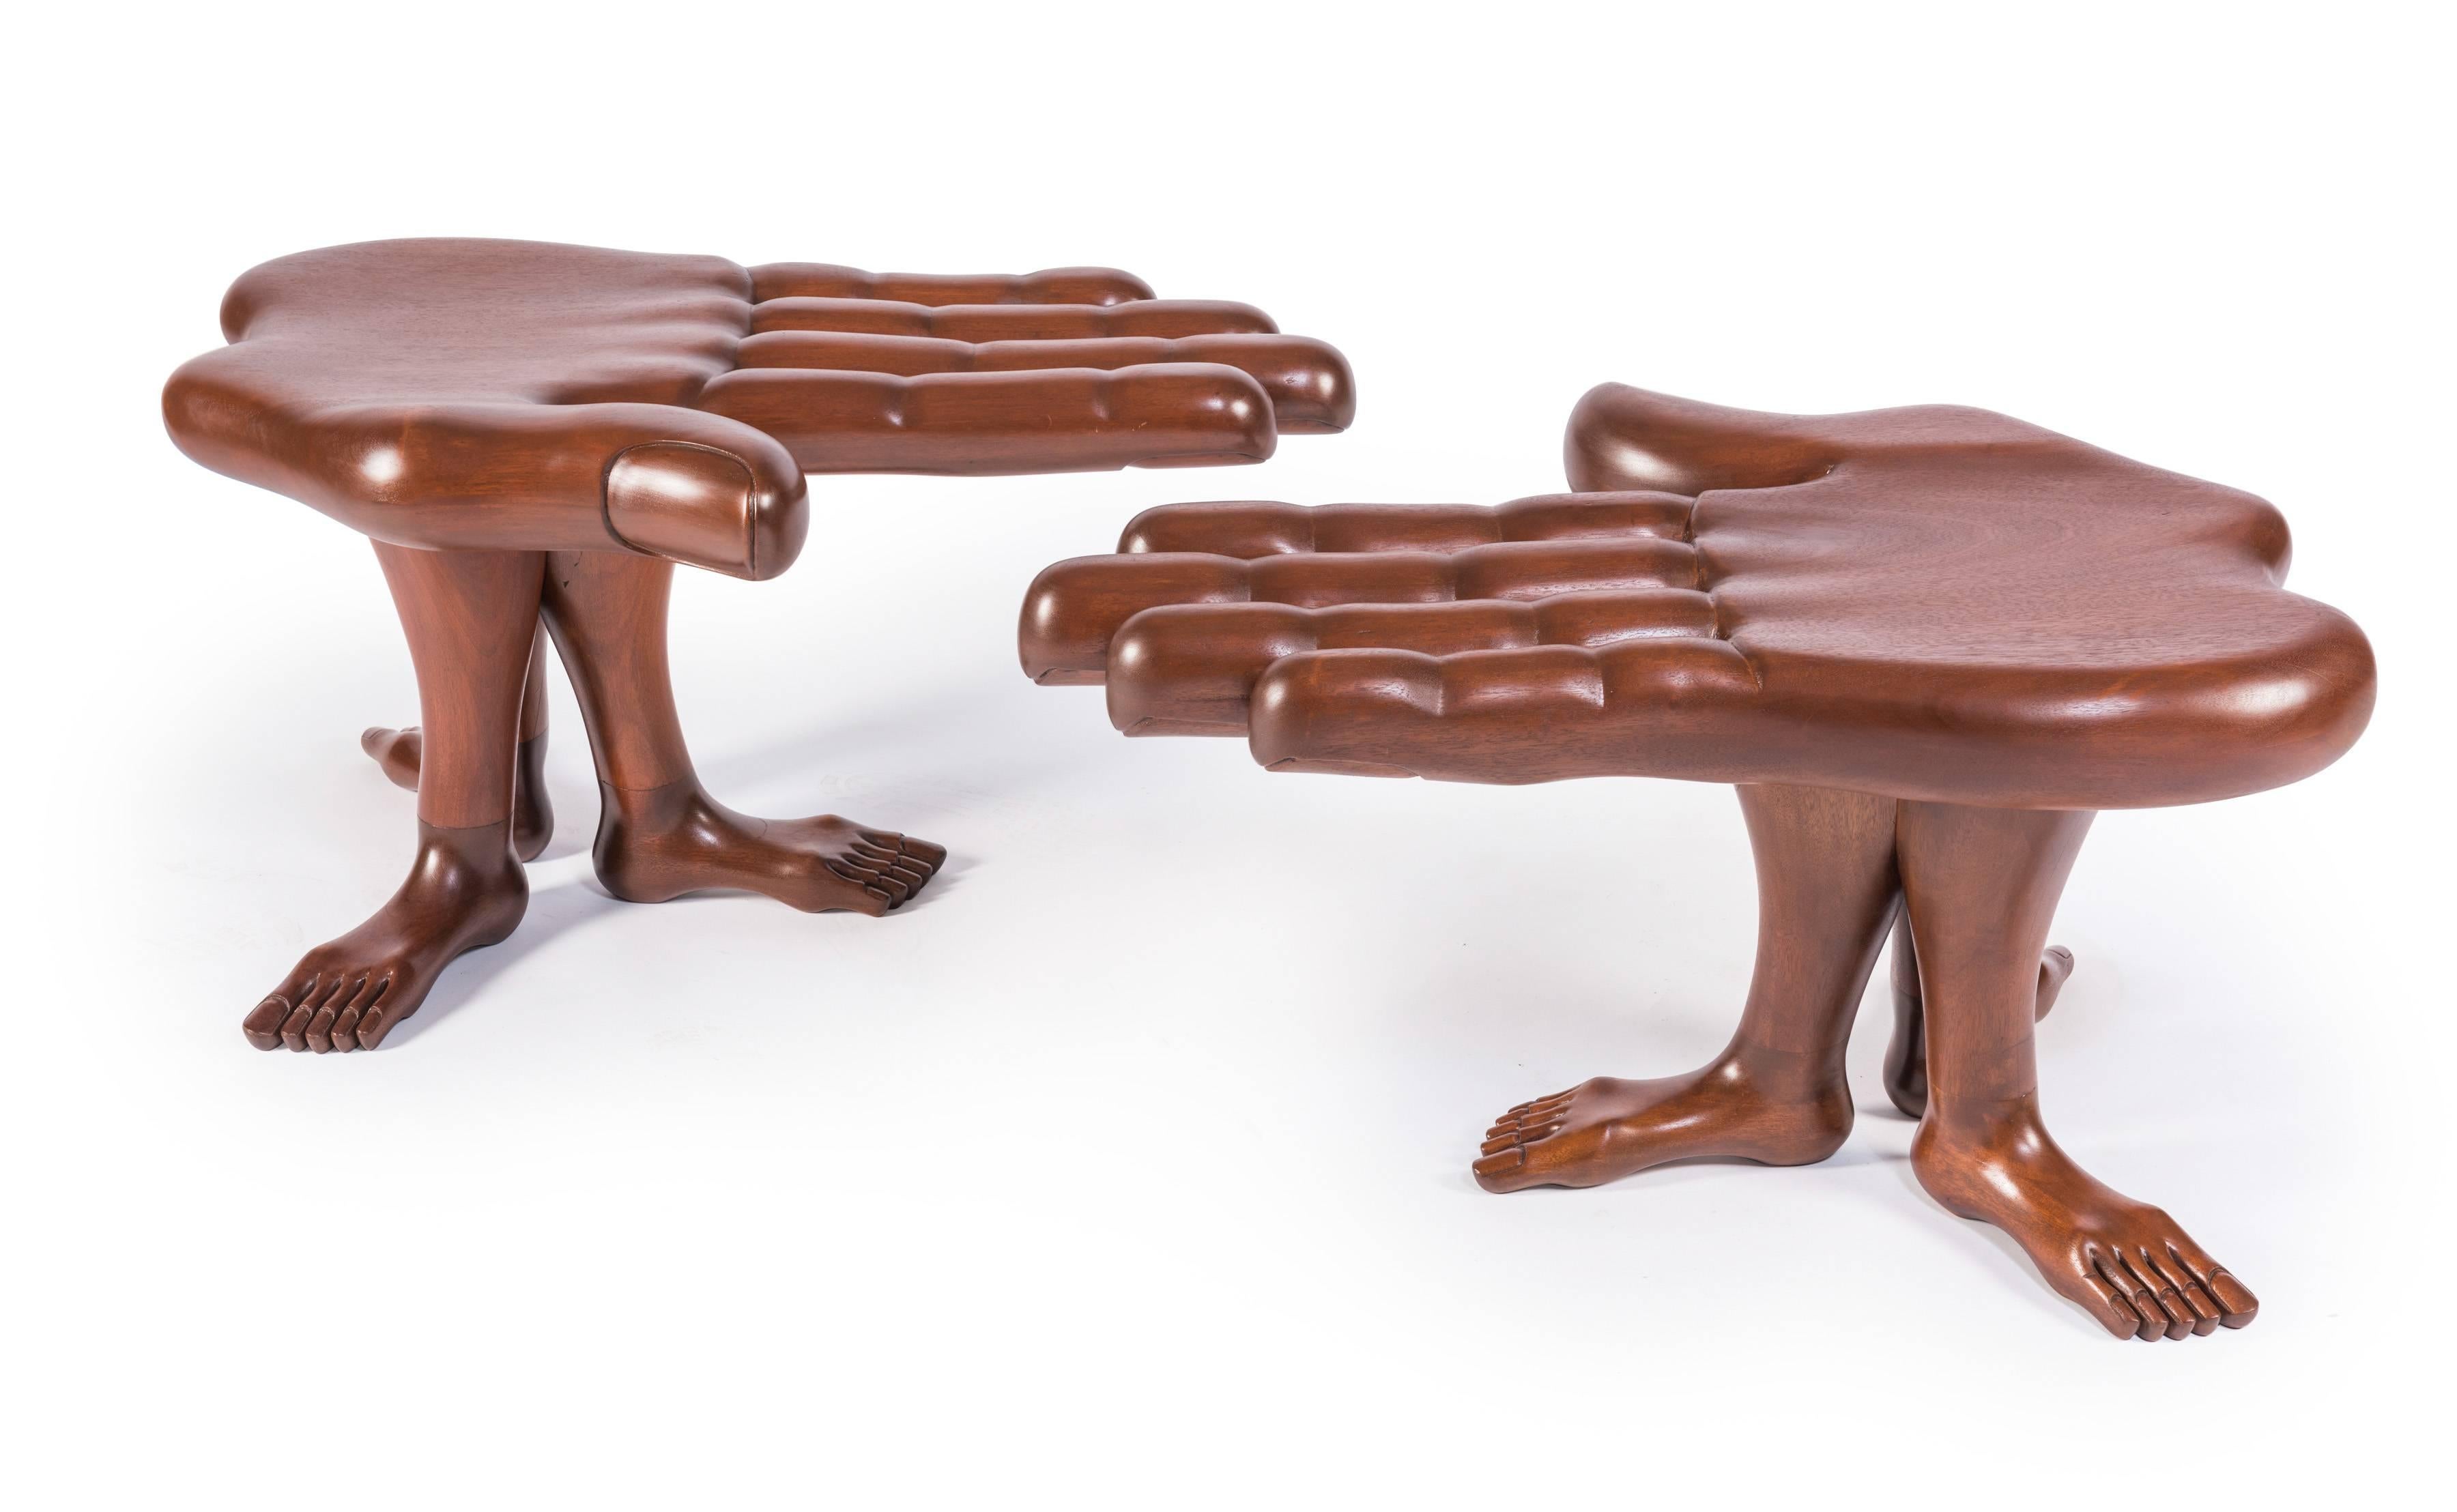 A rare pair of hand and foot tables or stools designed and made by Mexican Surrealist artist Pedro Friedeberg in his iconic hand and leg motifs. Made of laminated and blocked mahogany, this pair features a palm supported by three legs with feet.